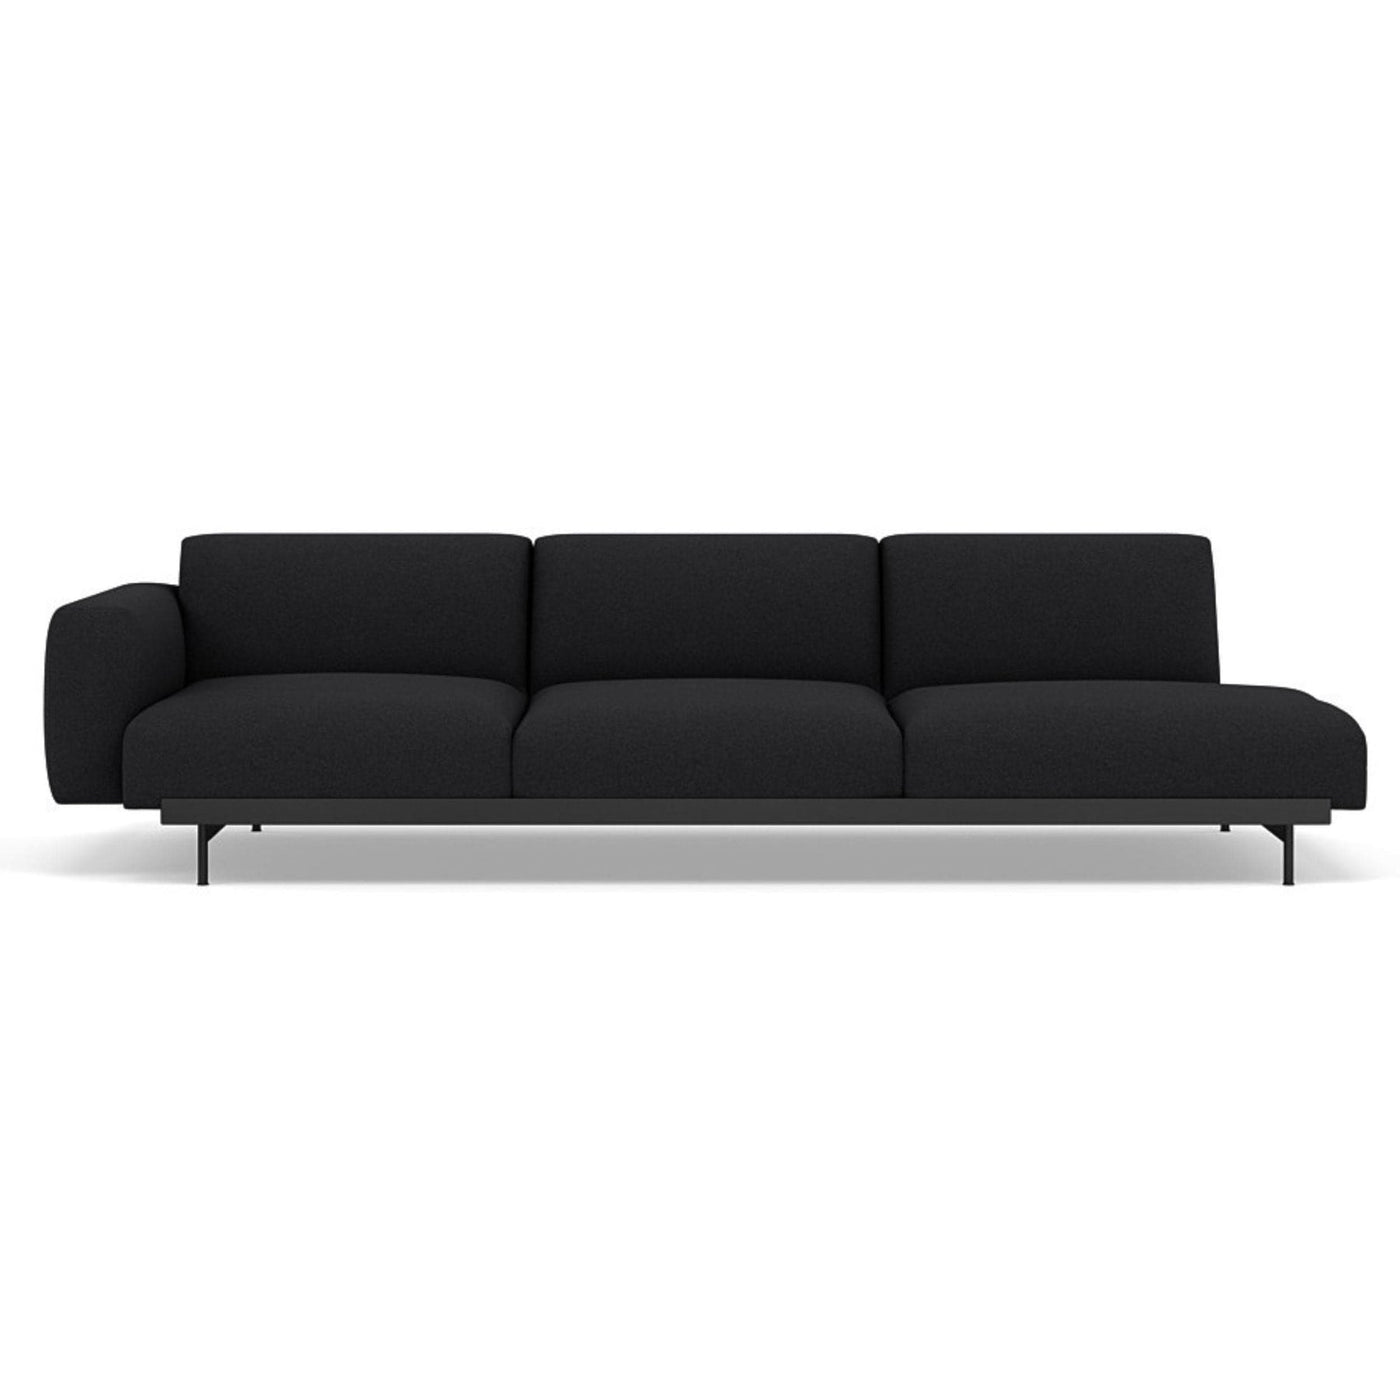 Muuto In Situ Modular 3 Seater Sofa, configuration 3. Made to order from someday designs. #colour_divina-md-193